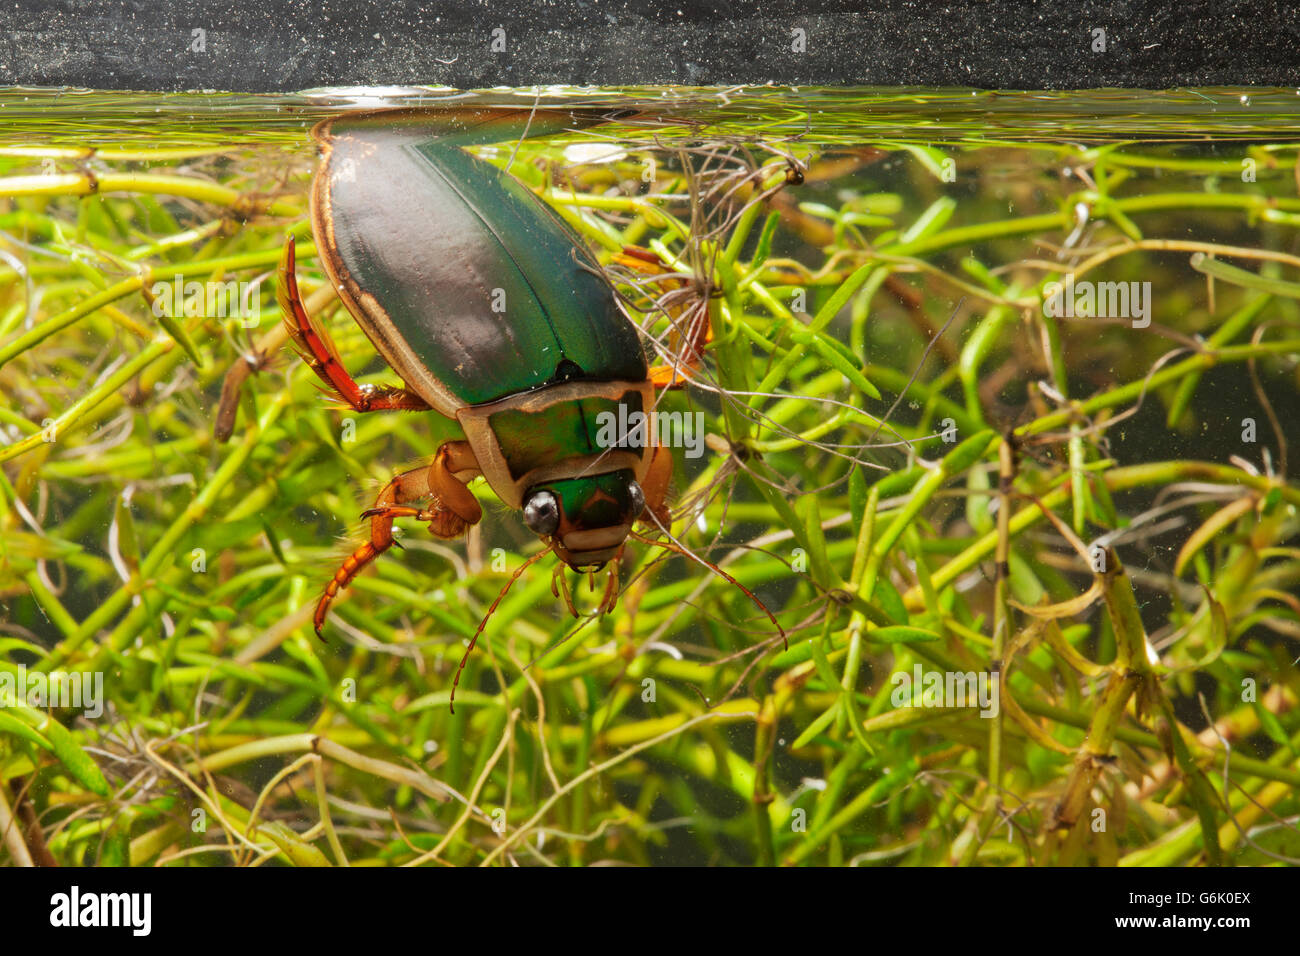 Great diving beetle (Dytiscus marginalis) collecting a bubble of air Stock Photo